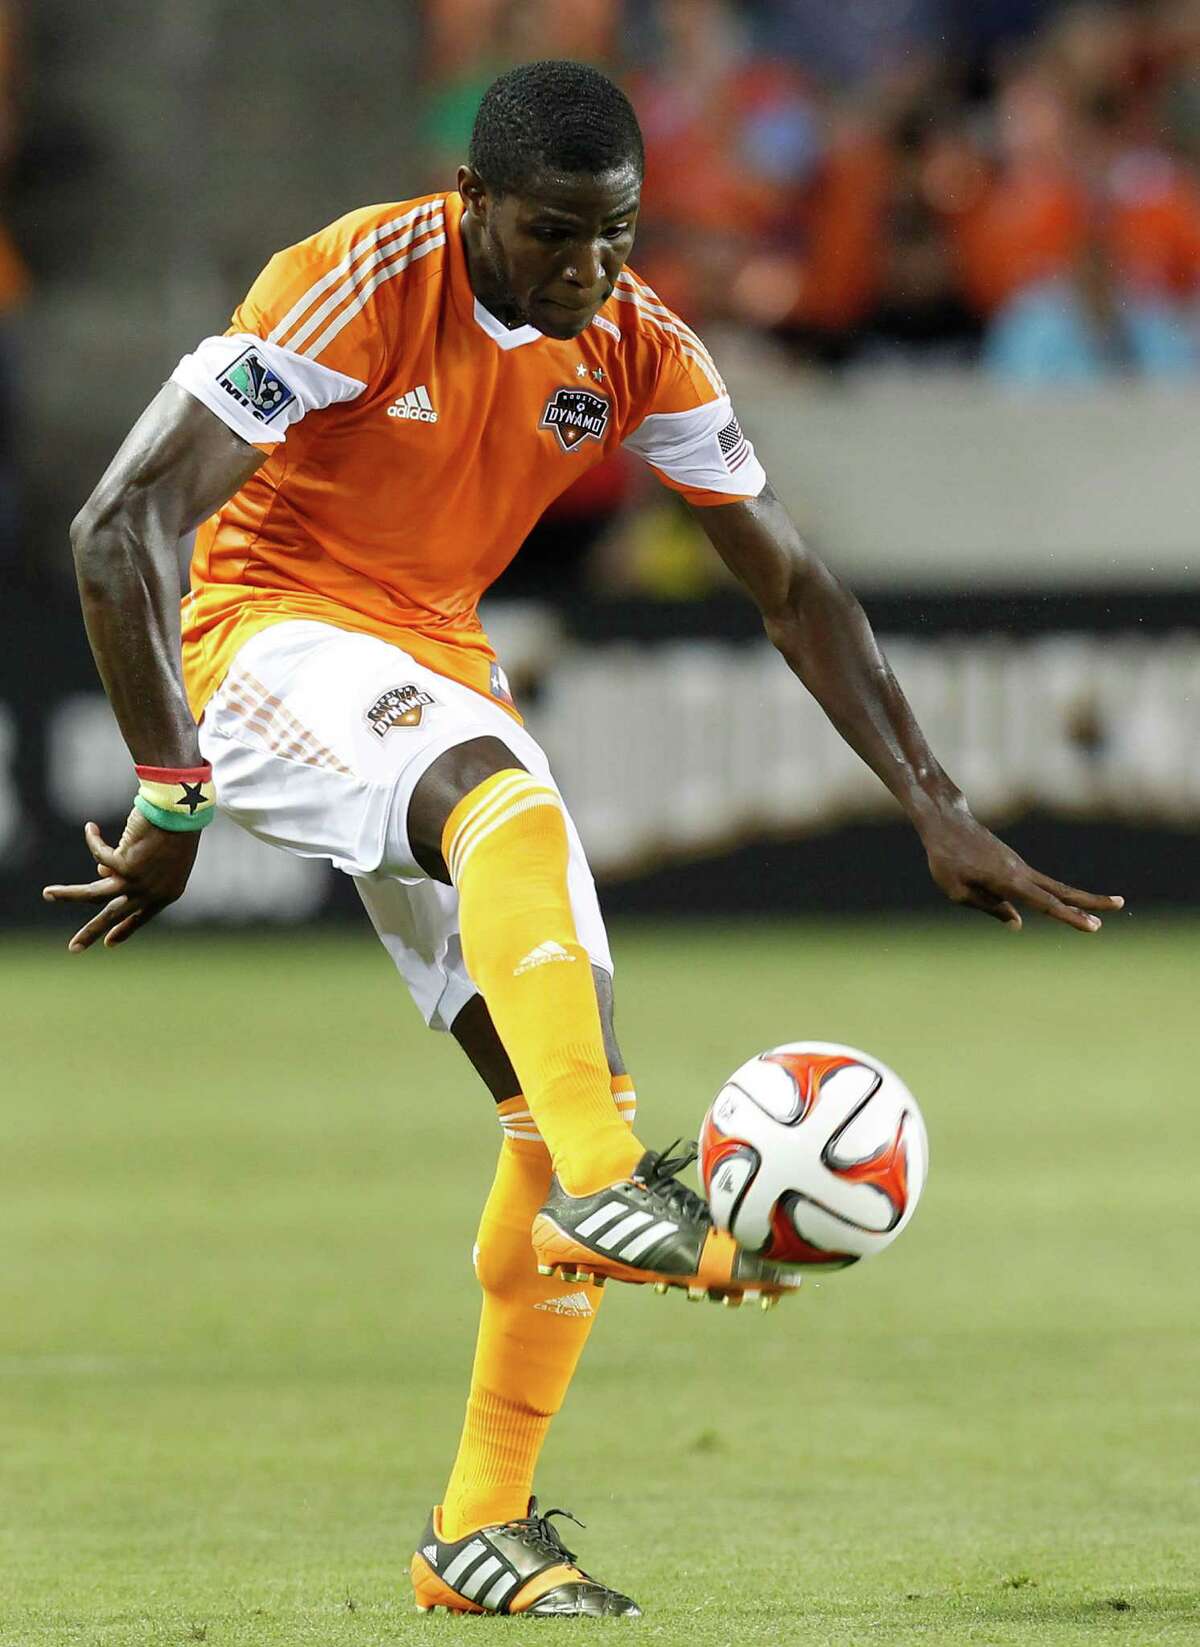 Houston Dynamo defender Kofi Sarkodie (8) traps the ball again as the Los Angeles Galaxy in the first half on May 17, 2014 at BBVA Compass Stadium in Houston, Texas.